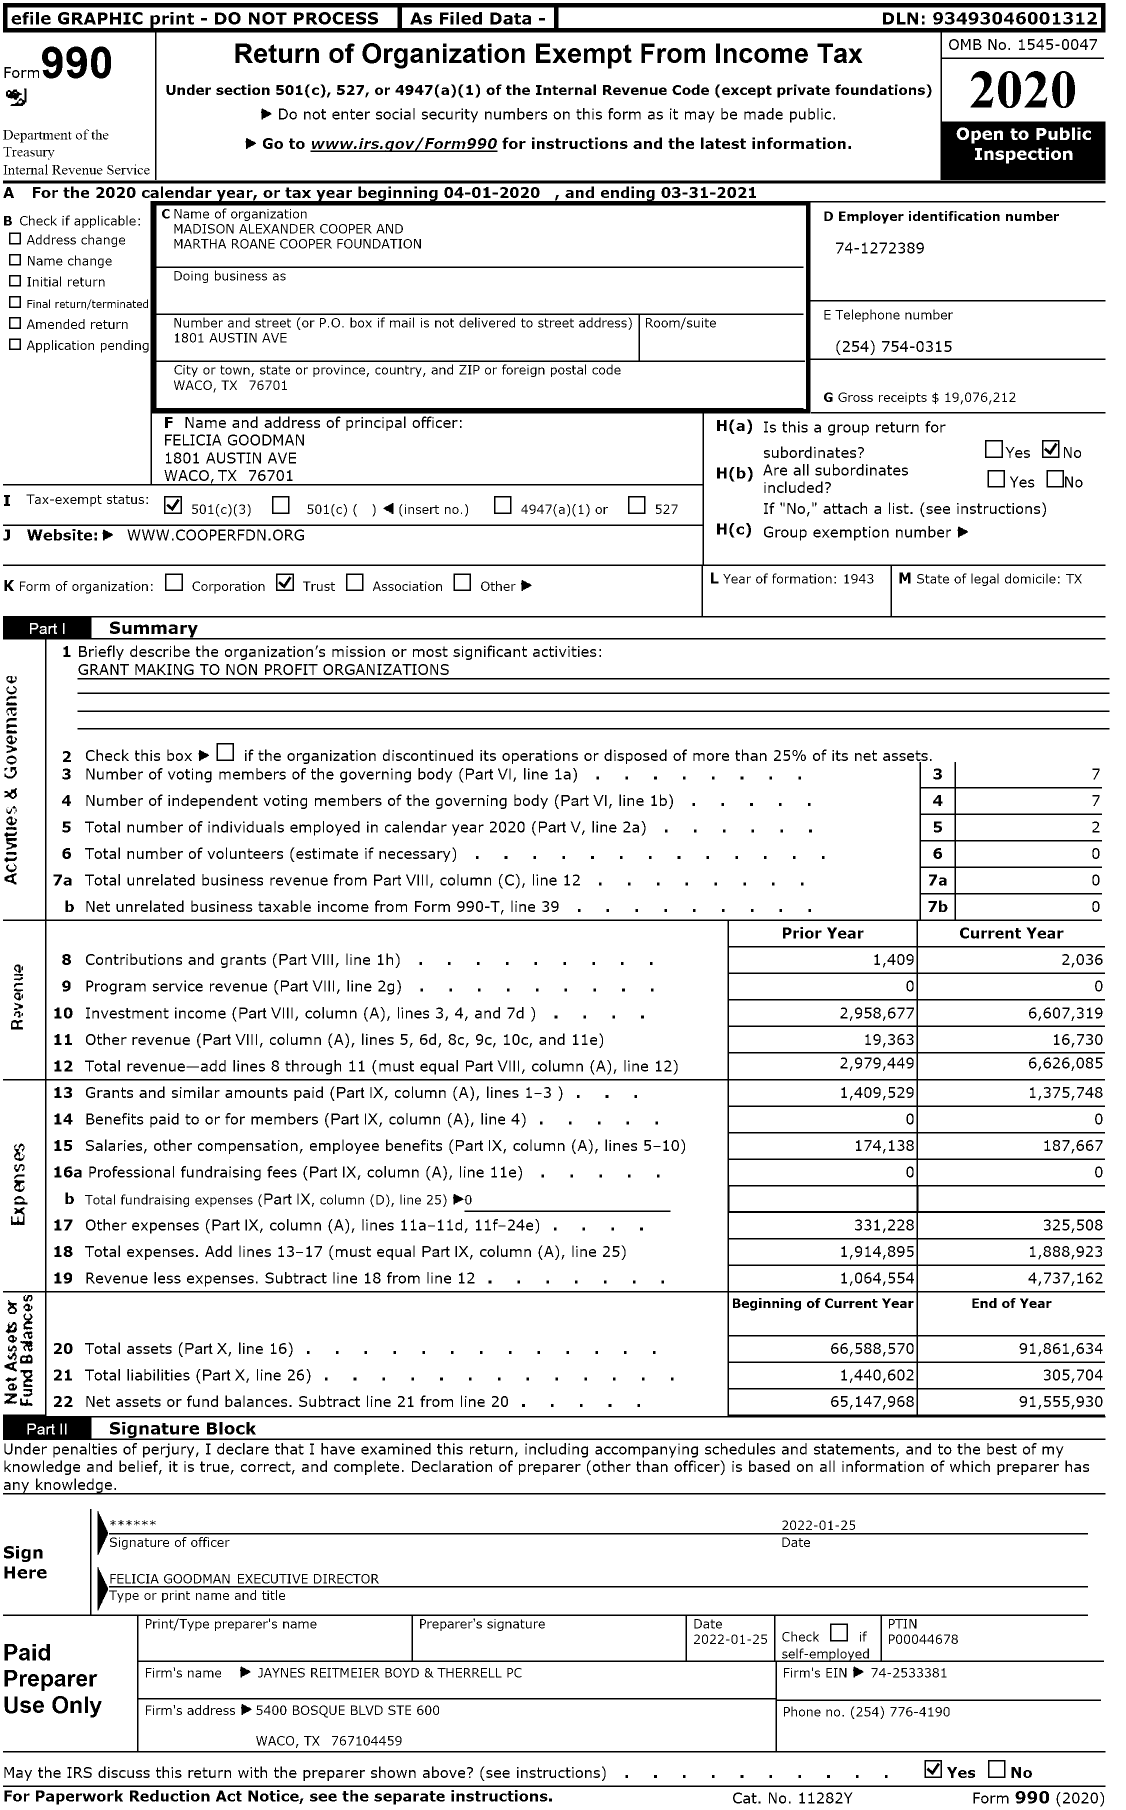 Image of first page of 2020 Form 990 for Madison Alexander Cooper and Martha Roane Cooper Foundation (CF)